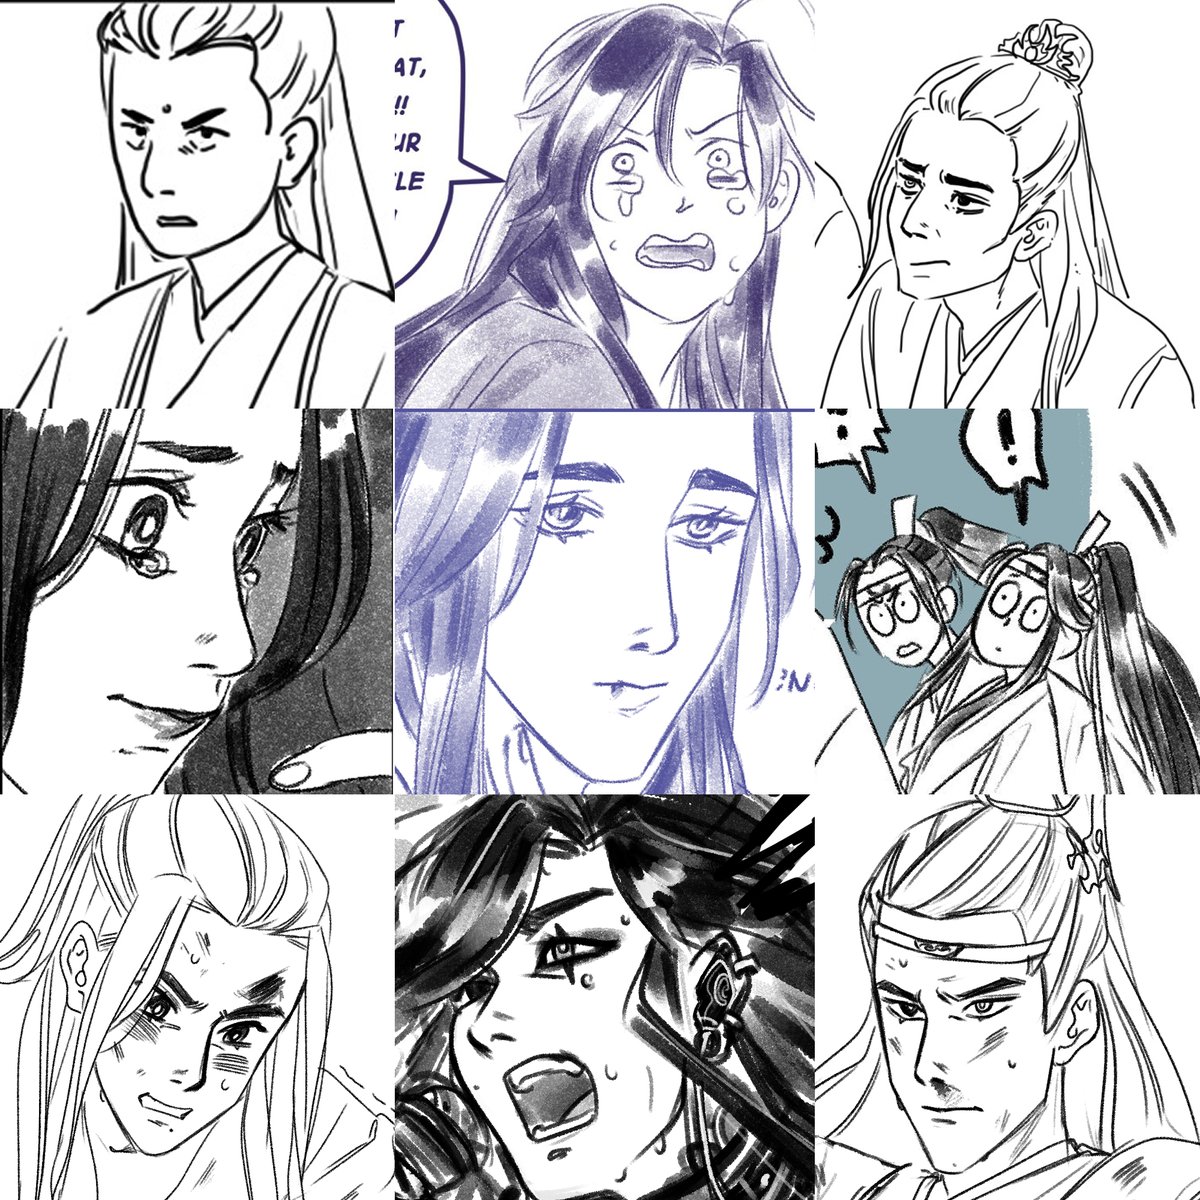 #faceyourart wangxian edition because who am i kidding, they're literally all i draw ?? also threw in the favorite expressions i like to draw 